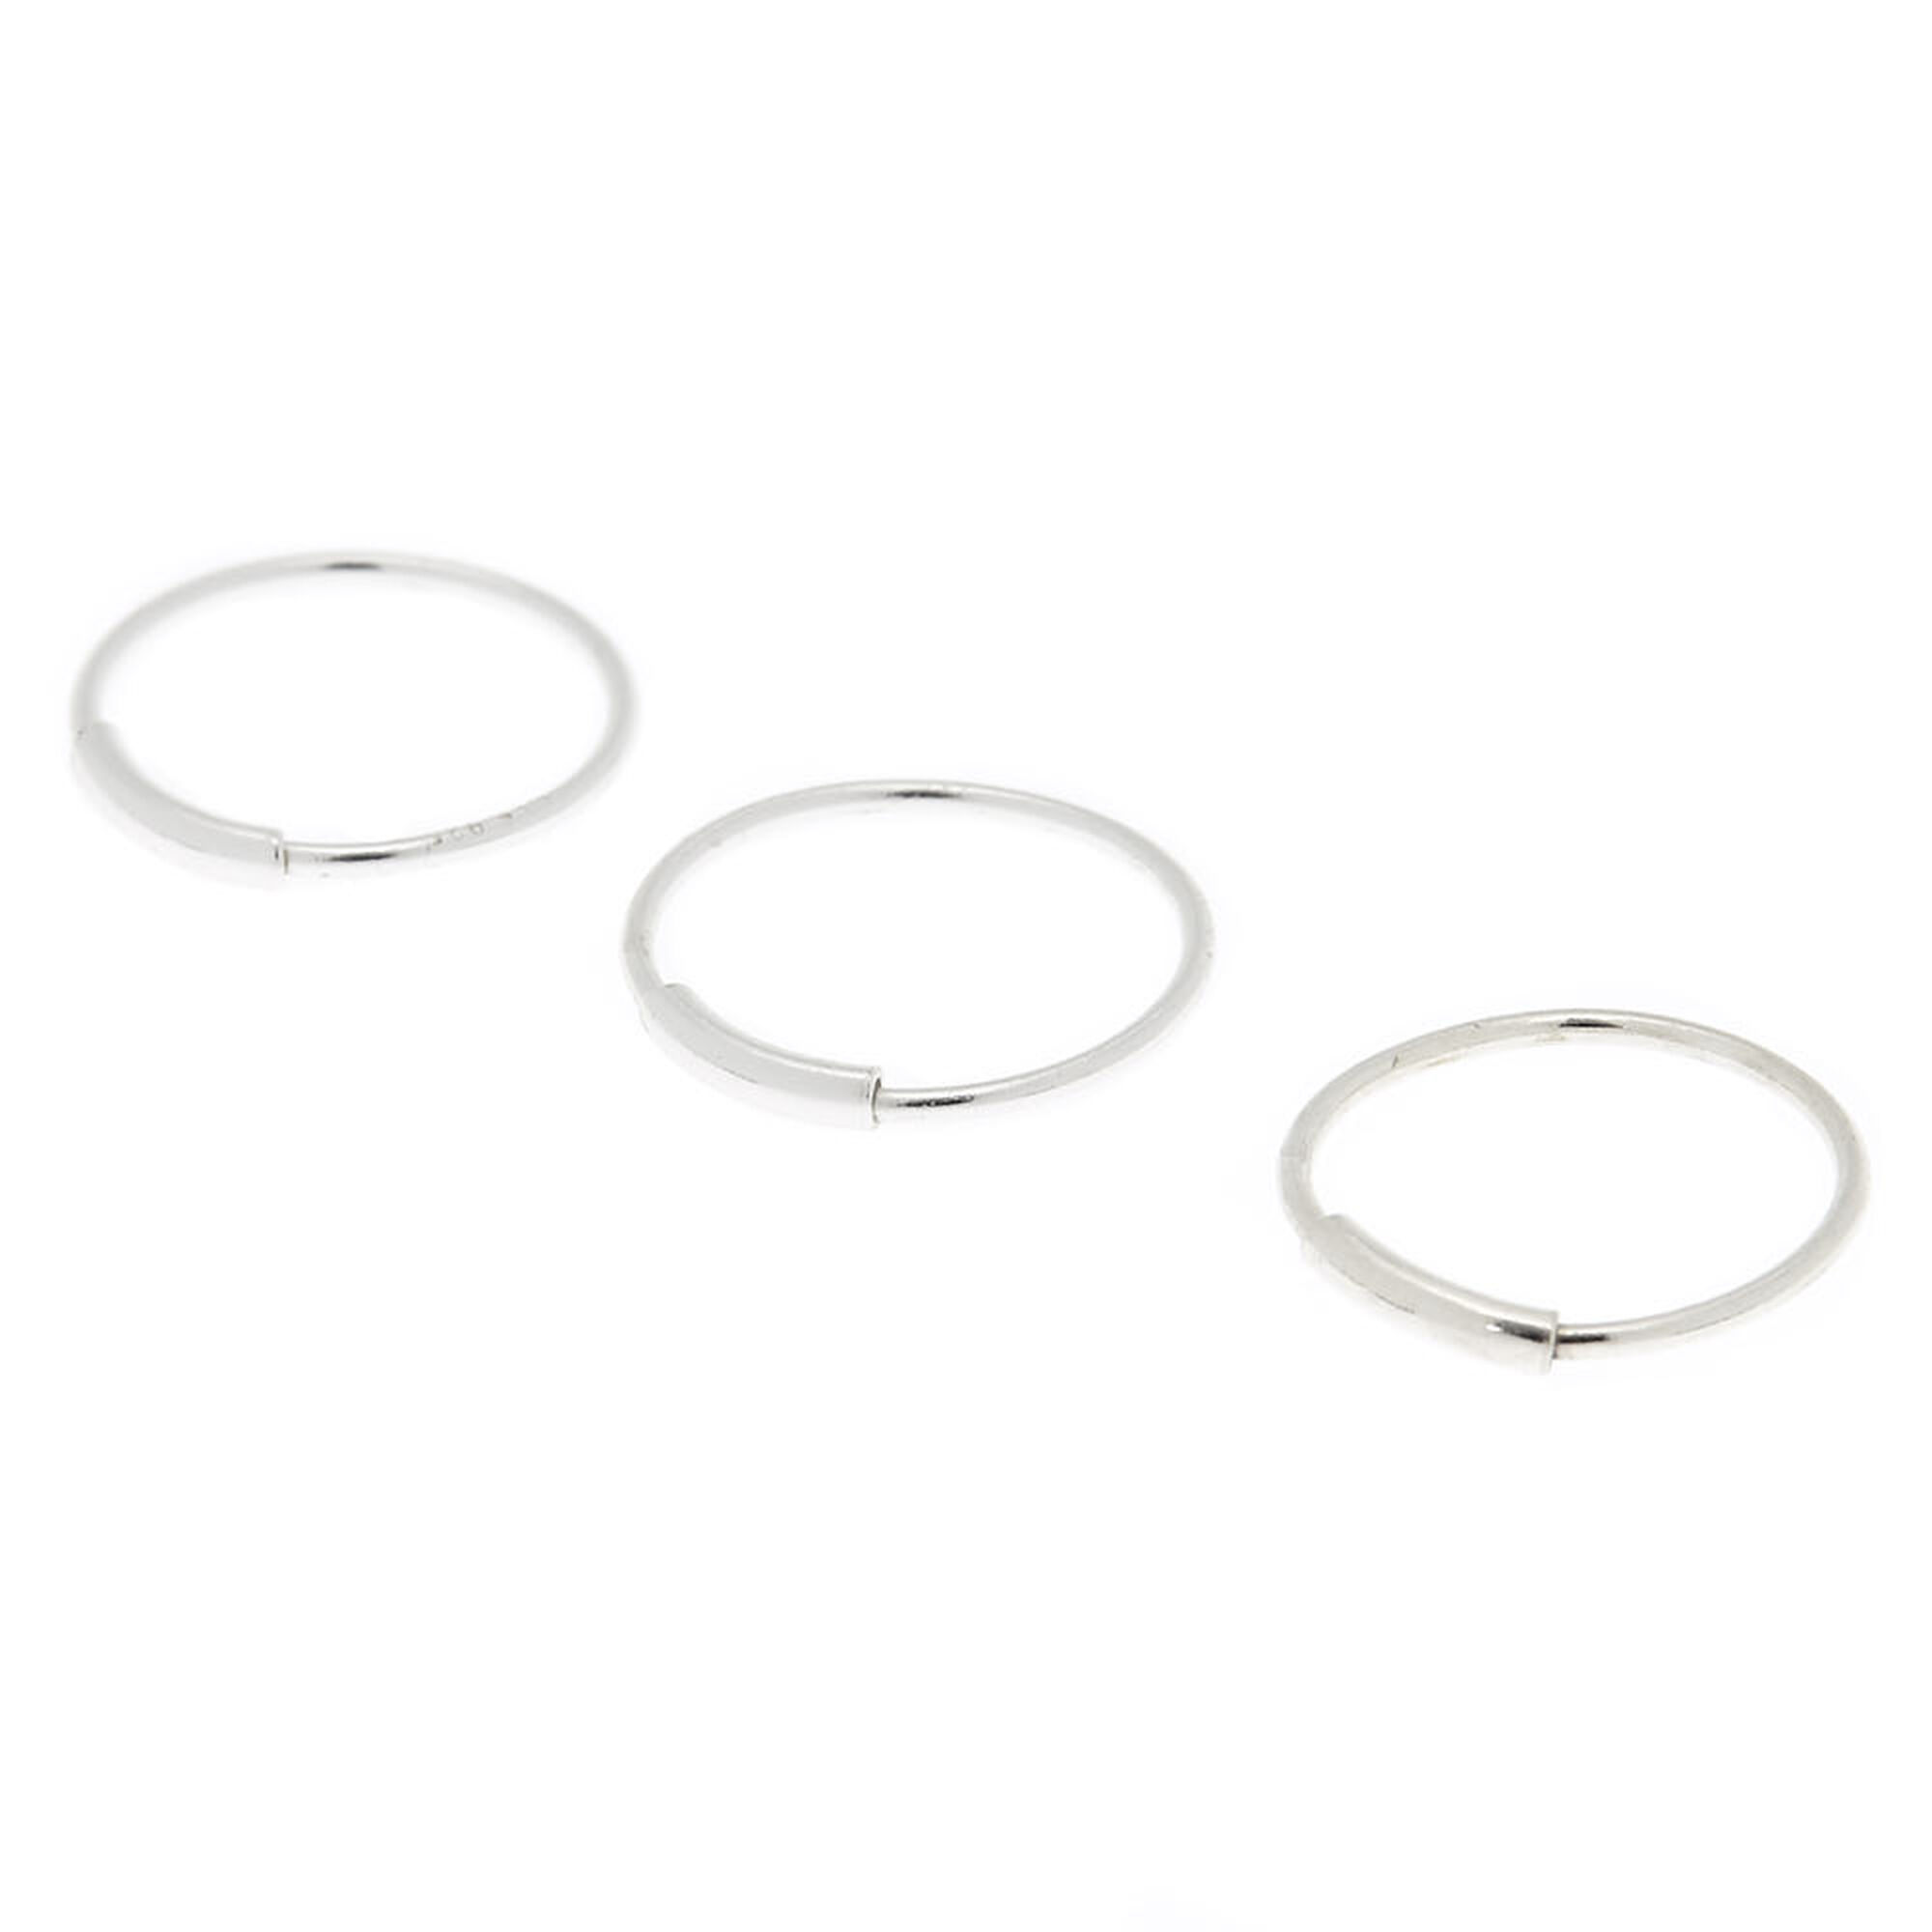 View Claires 22G Bar Hoop Nose Rings 3 Pack Silver information